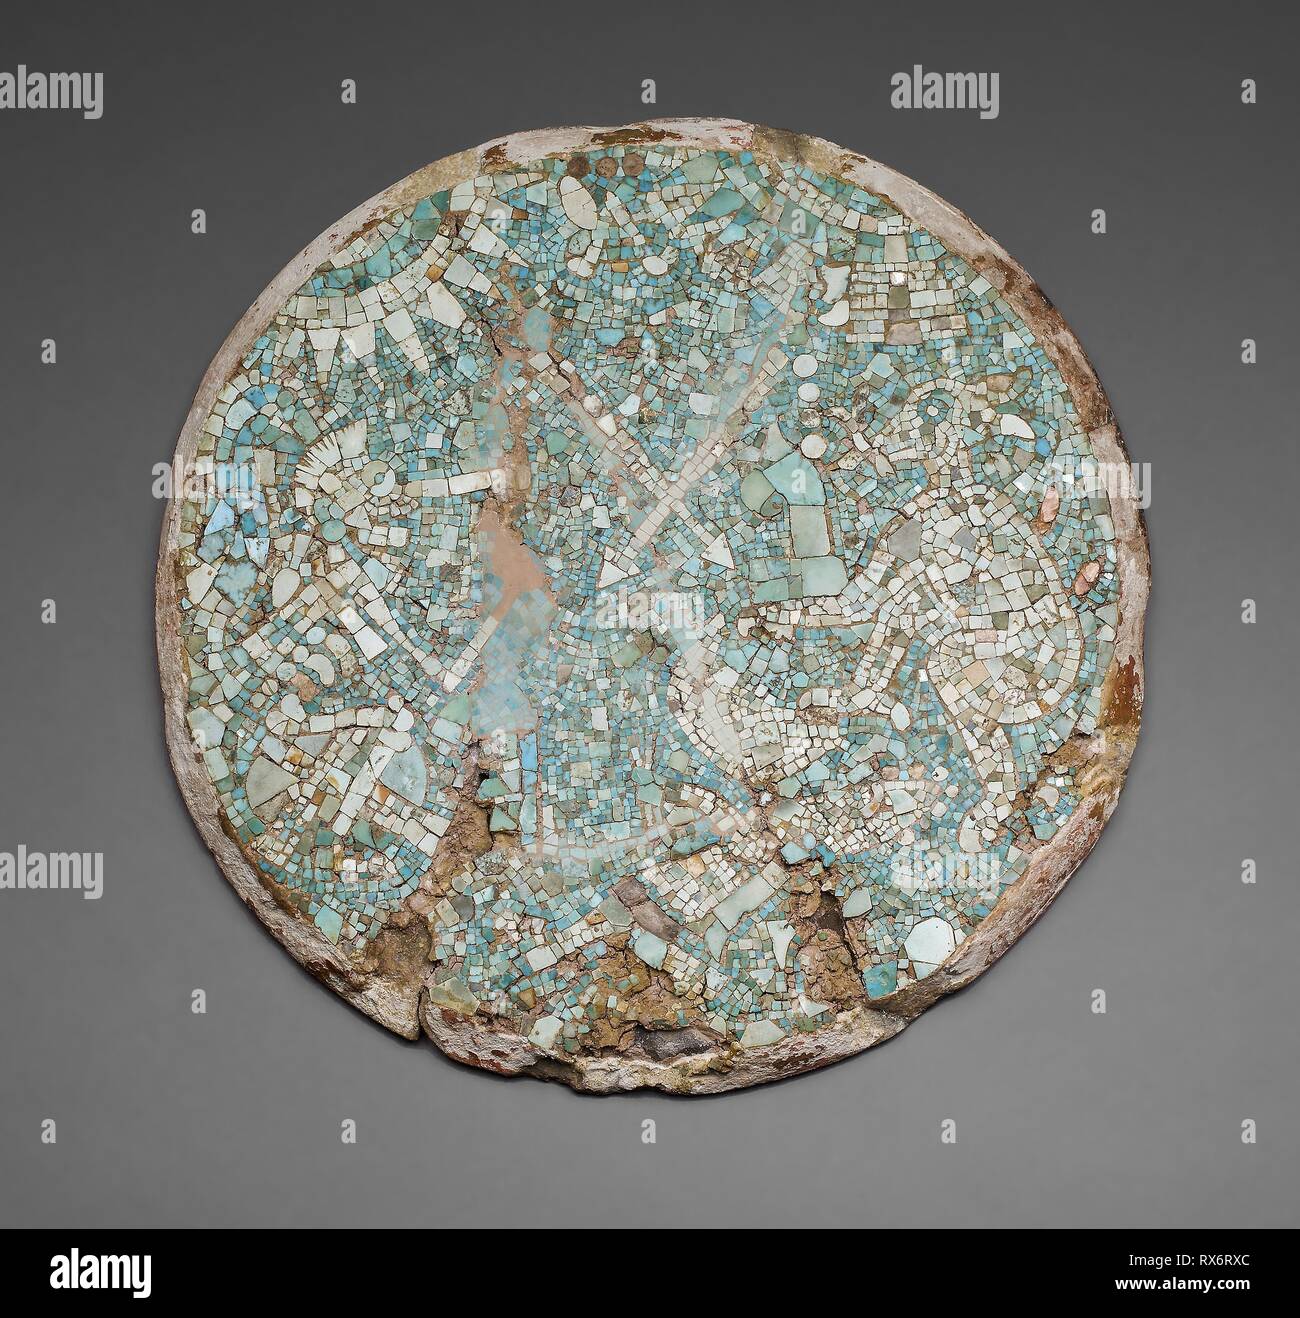 Mosaic Disk with a Mythological and Historical Scene. Mixtec; Northern Oaxaca, Mexico. Date: 1401-1500. Dimensions: Diam. 30.5 cm (12 in.). Turquoise, earthenware, stucco, spondylus shell, mother of pearl, and iron pyrite, with pigment. Origin: Oaxaca state. Museum: The Chicago Art Institute. Stock Photo